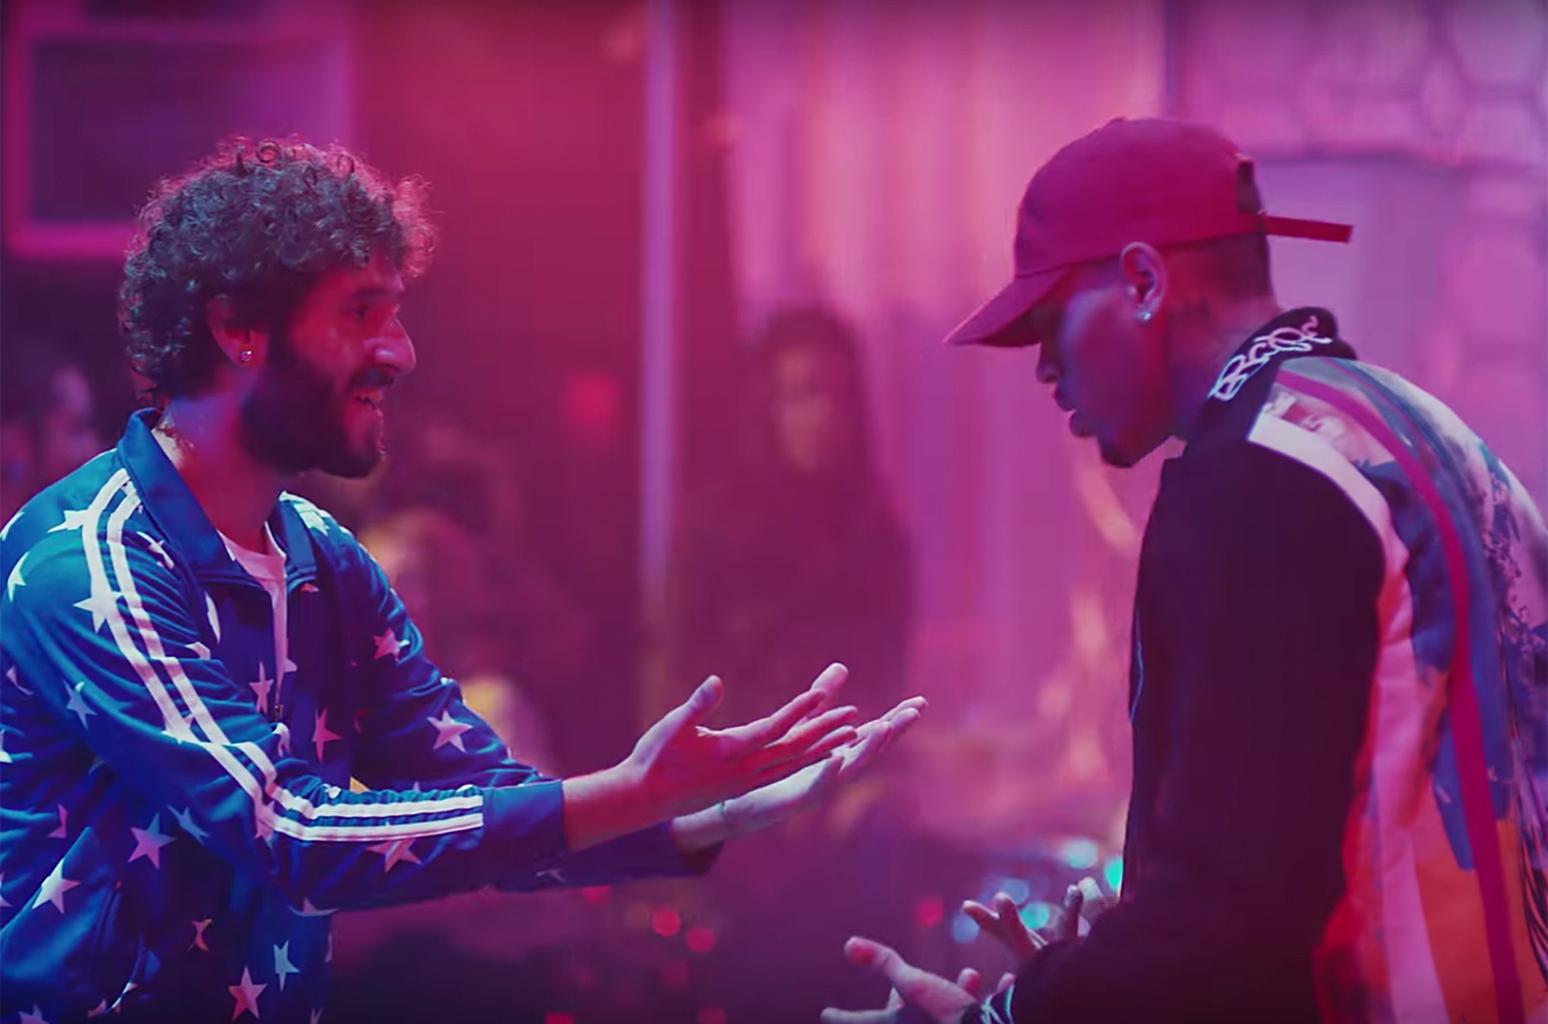 Lil Dicky's 'Freaky Friday' Lyrics, Feat. Chris Brown